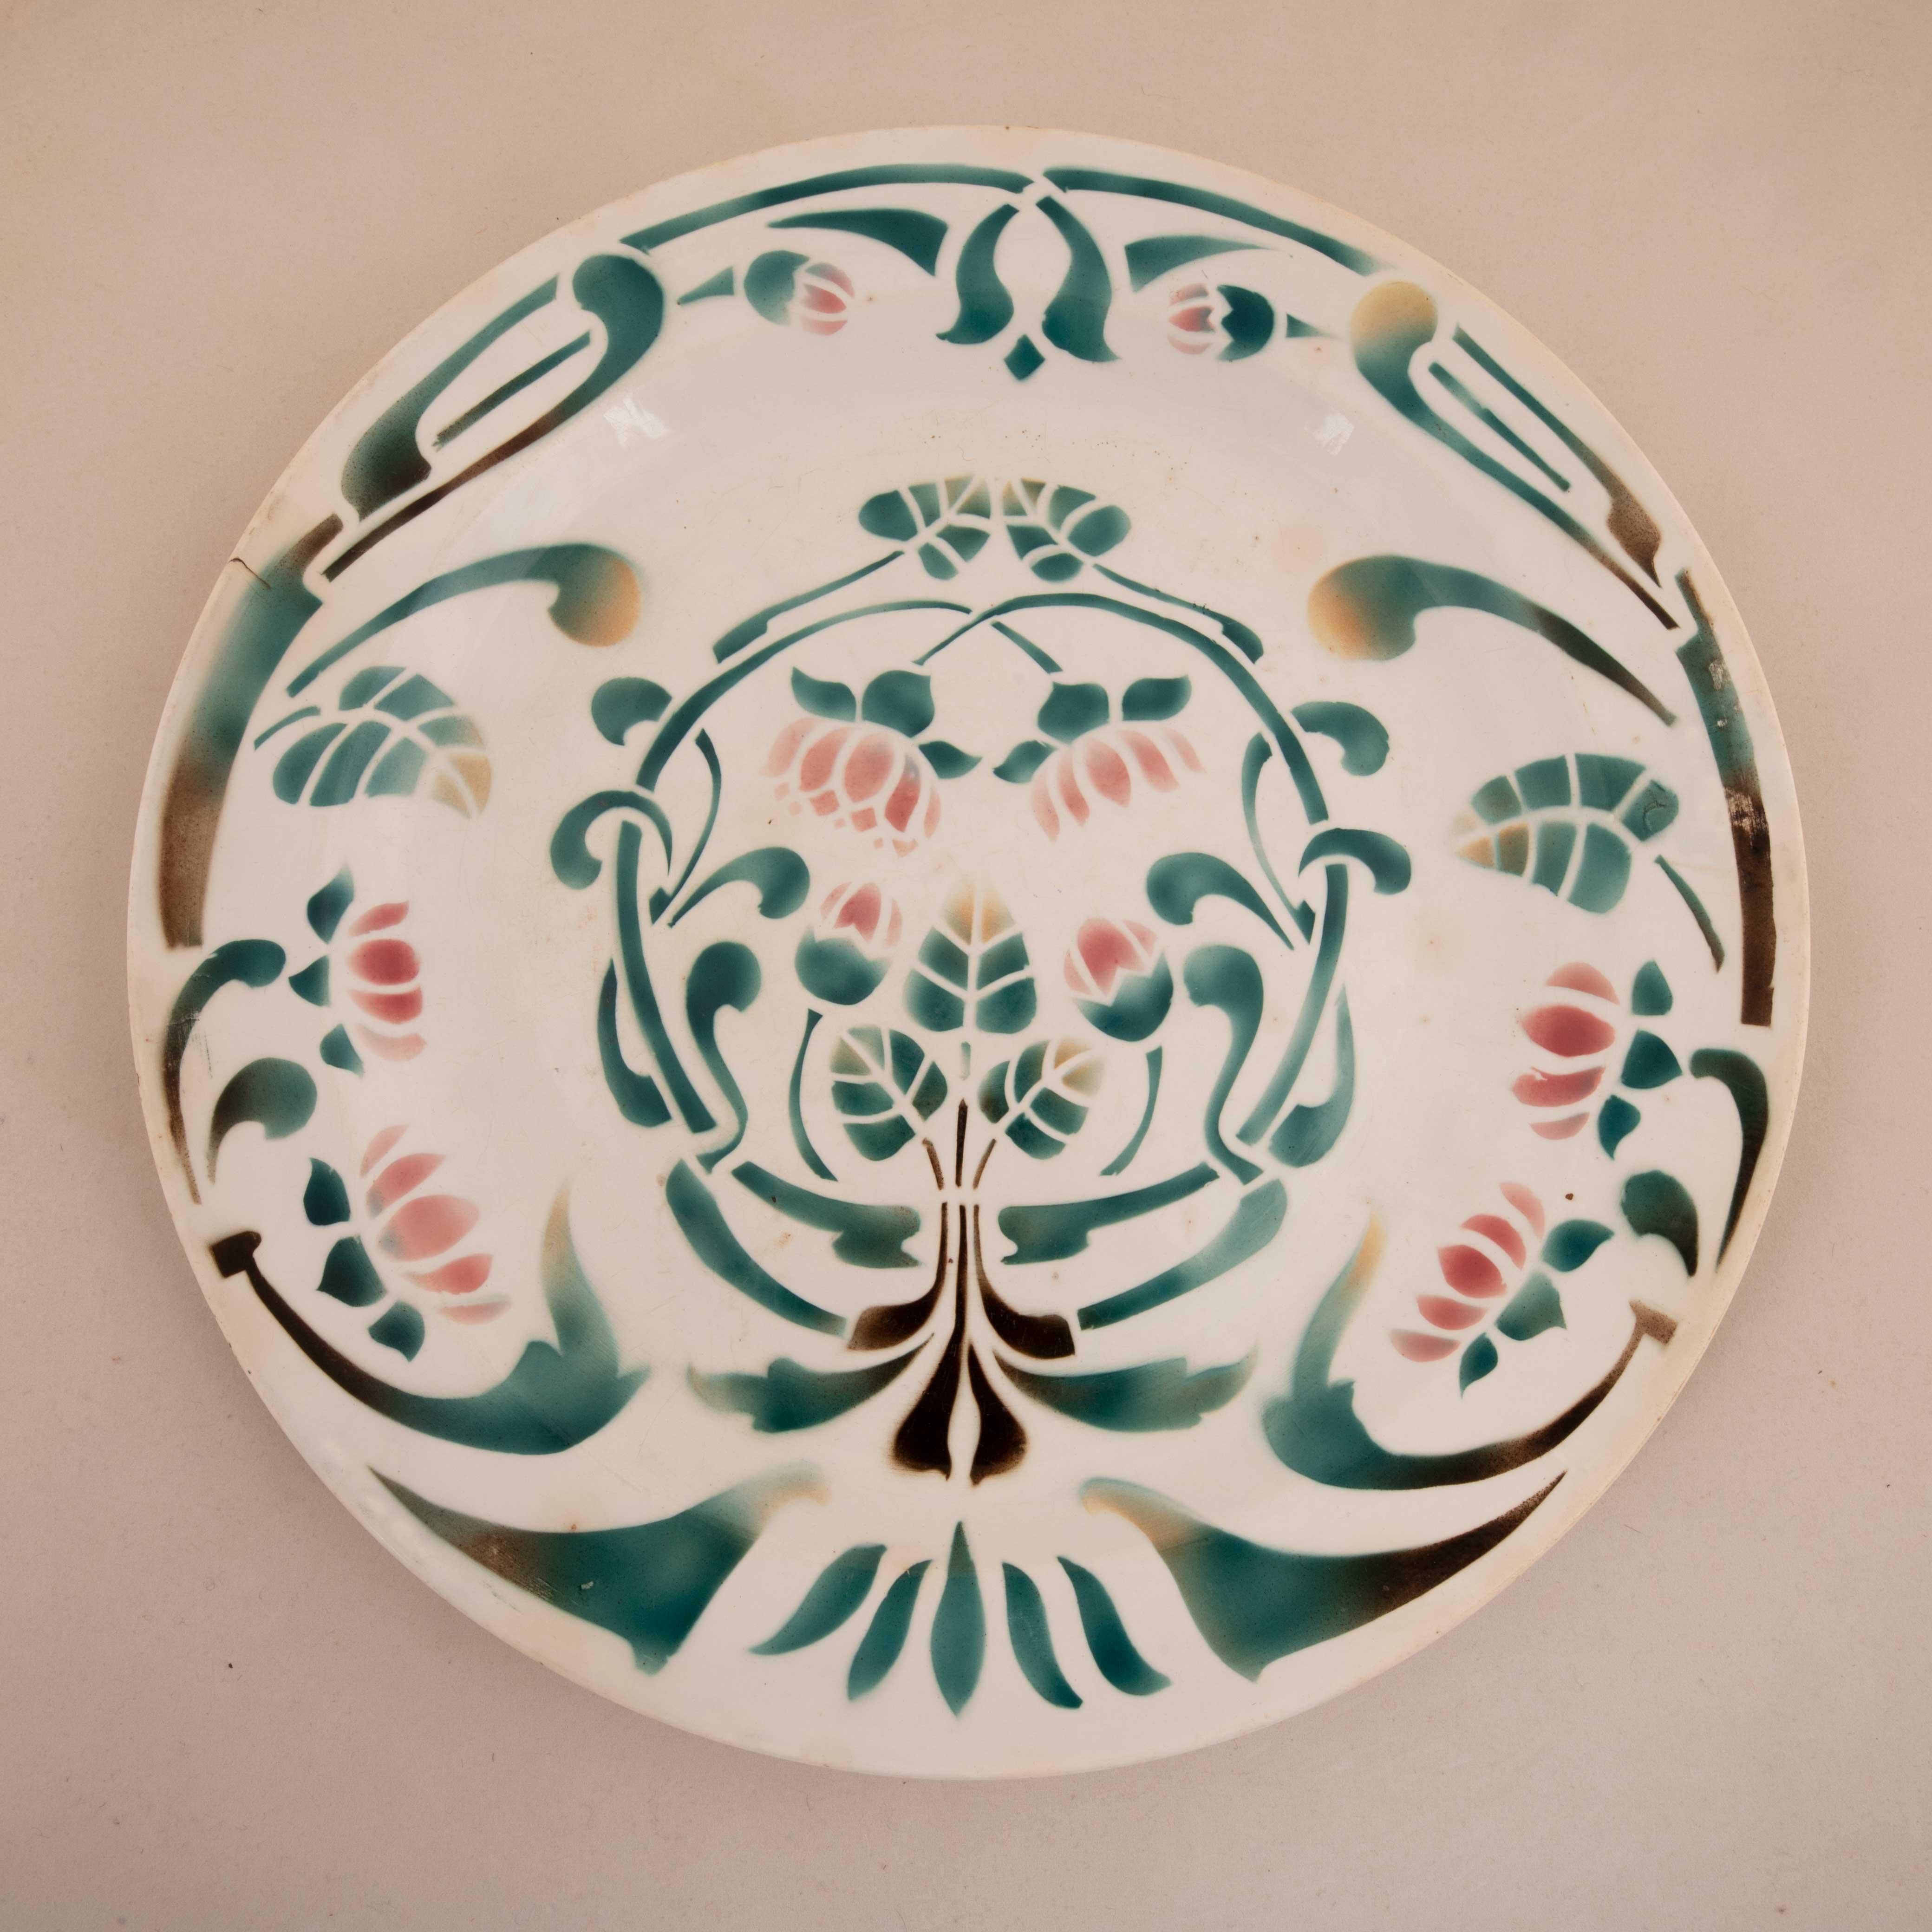 The Kuznetsov factory was in Volkhov, Russia, was established in 1889, one of many owned by the Kuznetsov family, producing faience chiefly for the Ottoman and Central Asian market, where it was much in demand. Their designs were mainly floral and